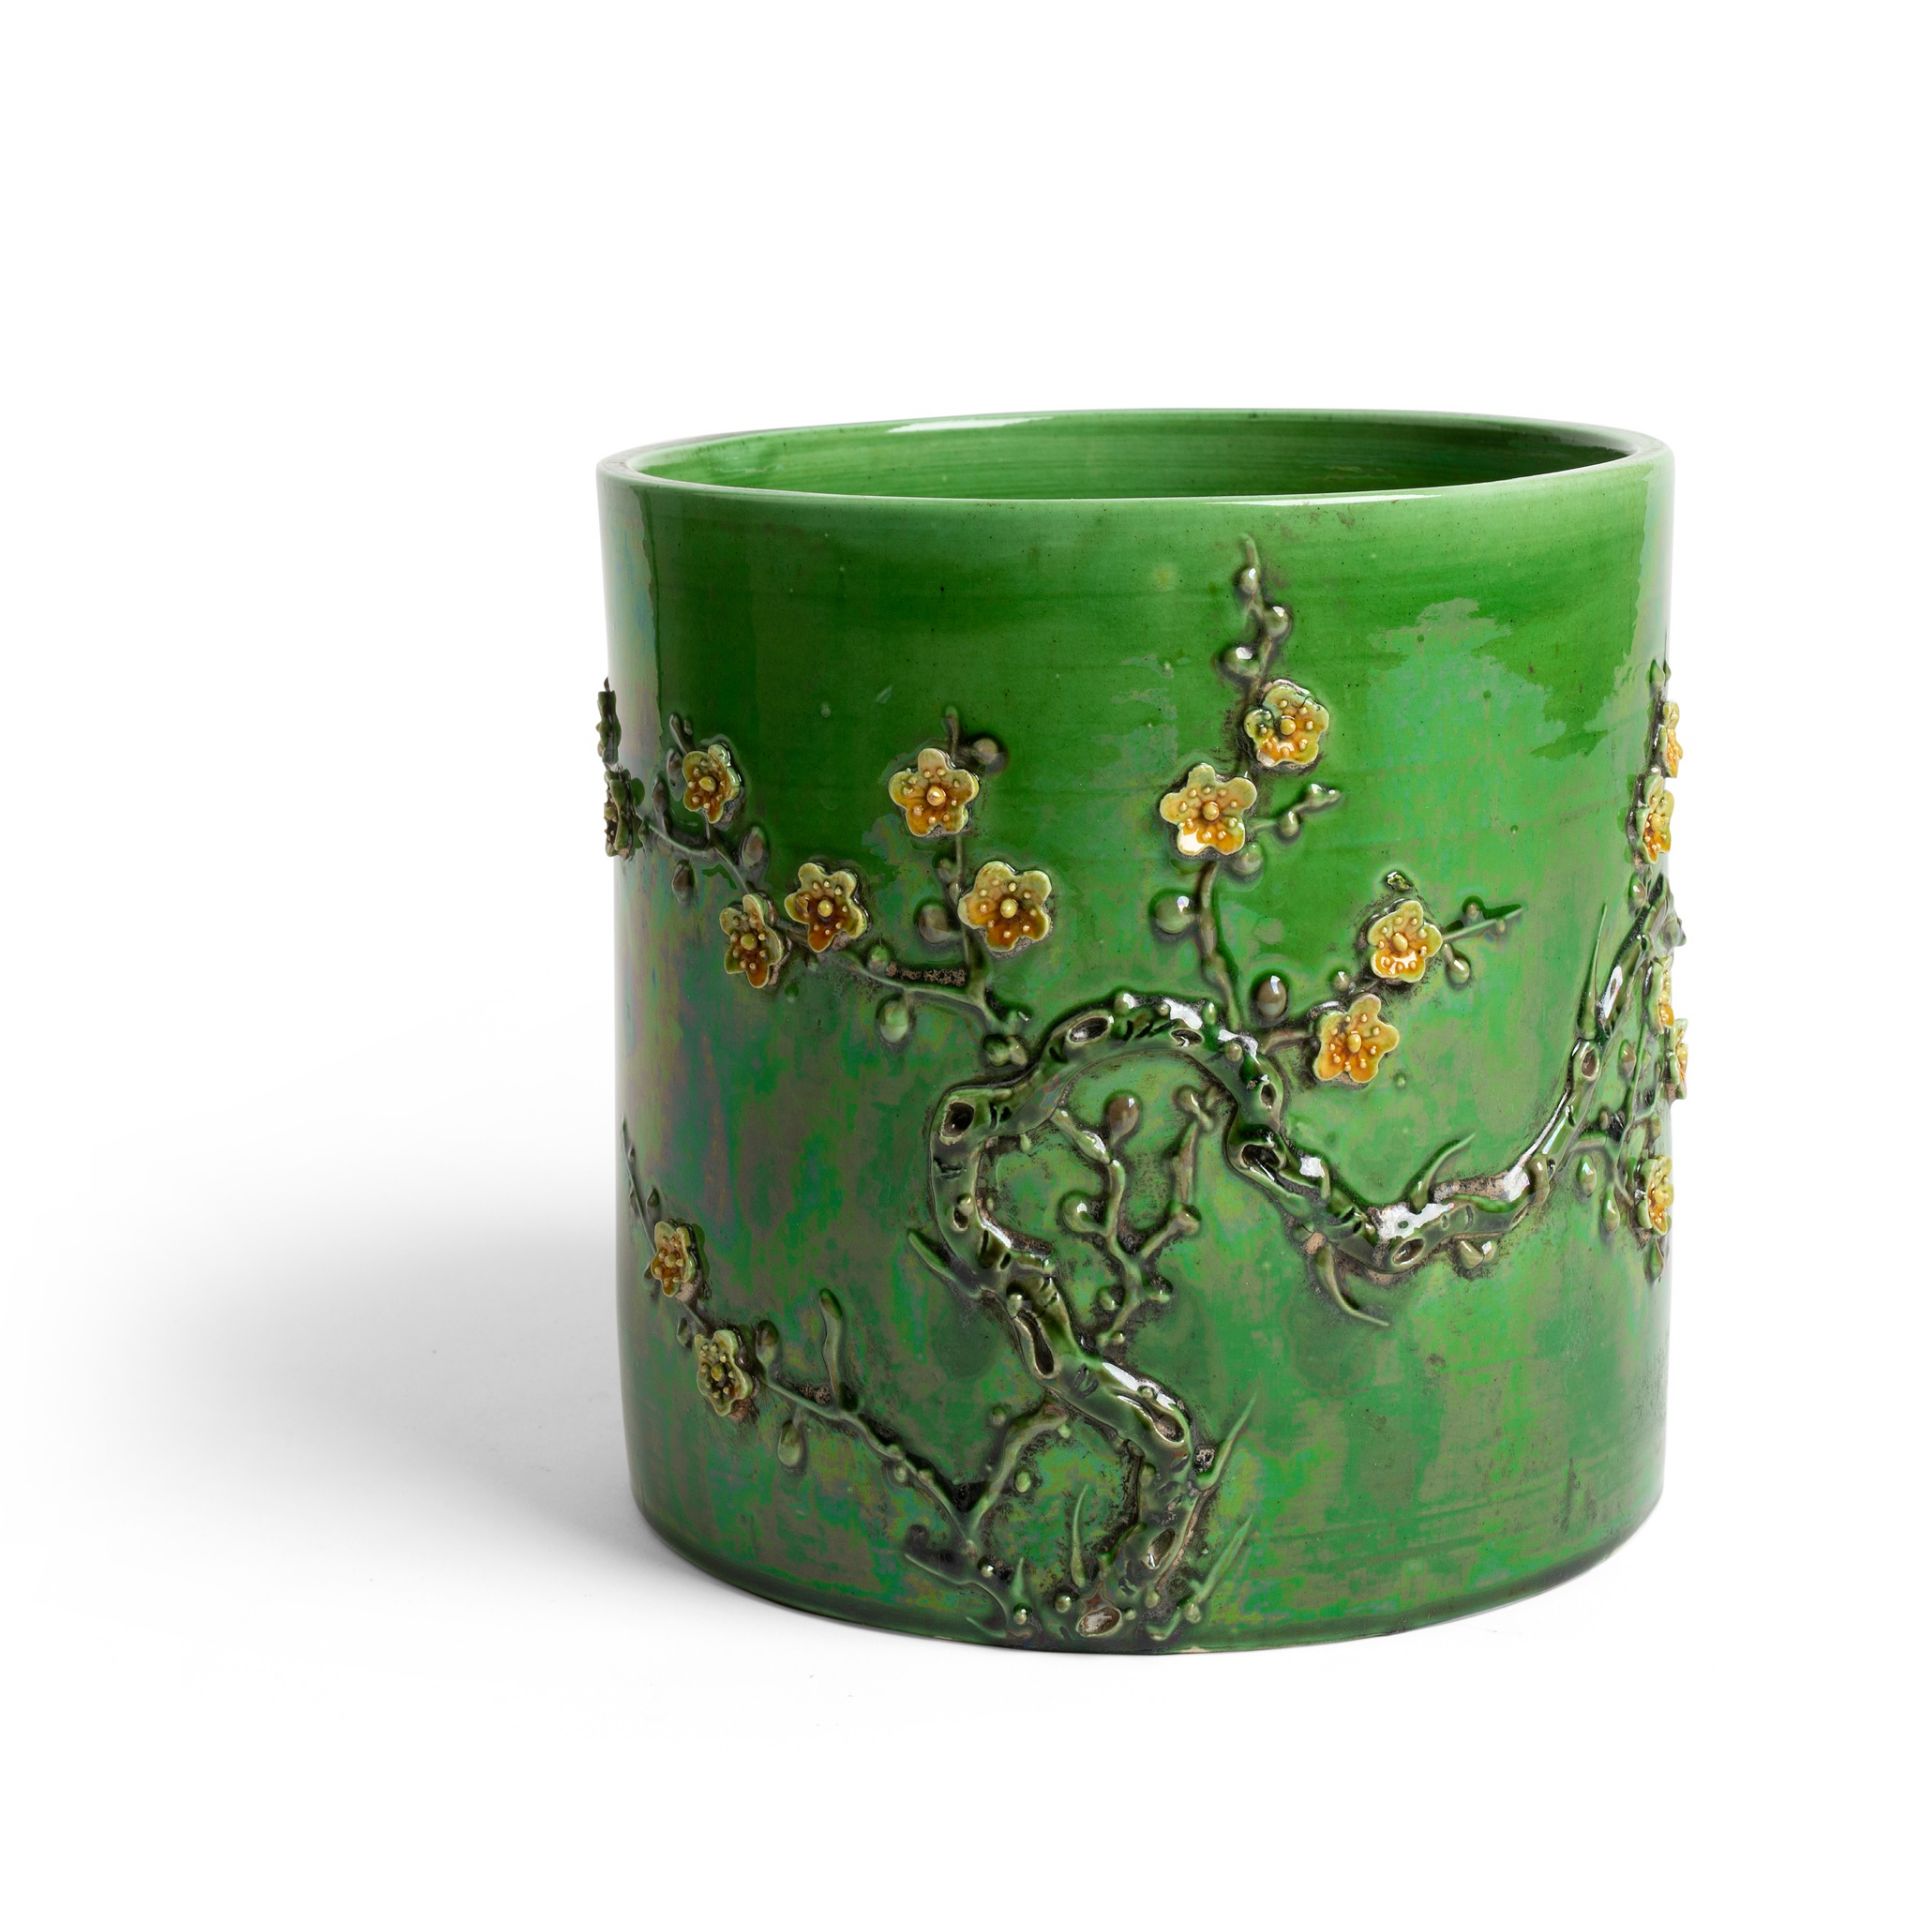 GREEN AND YELLOW-ENAMELLED BISCUIT BRUSH POT GUANGXU PERIOD